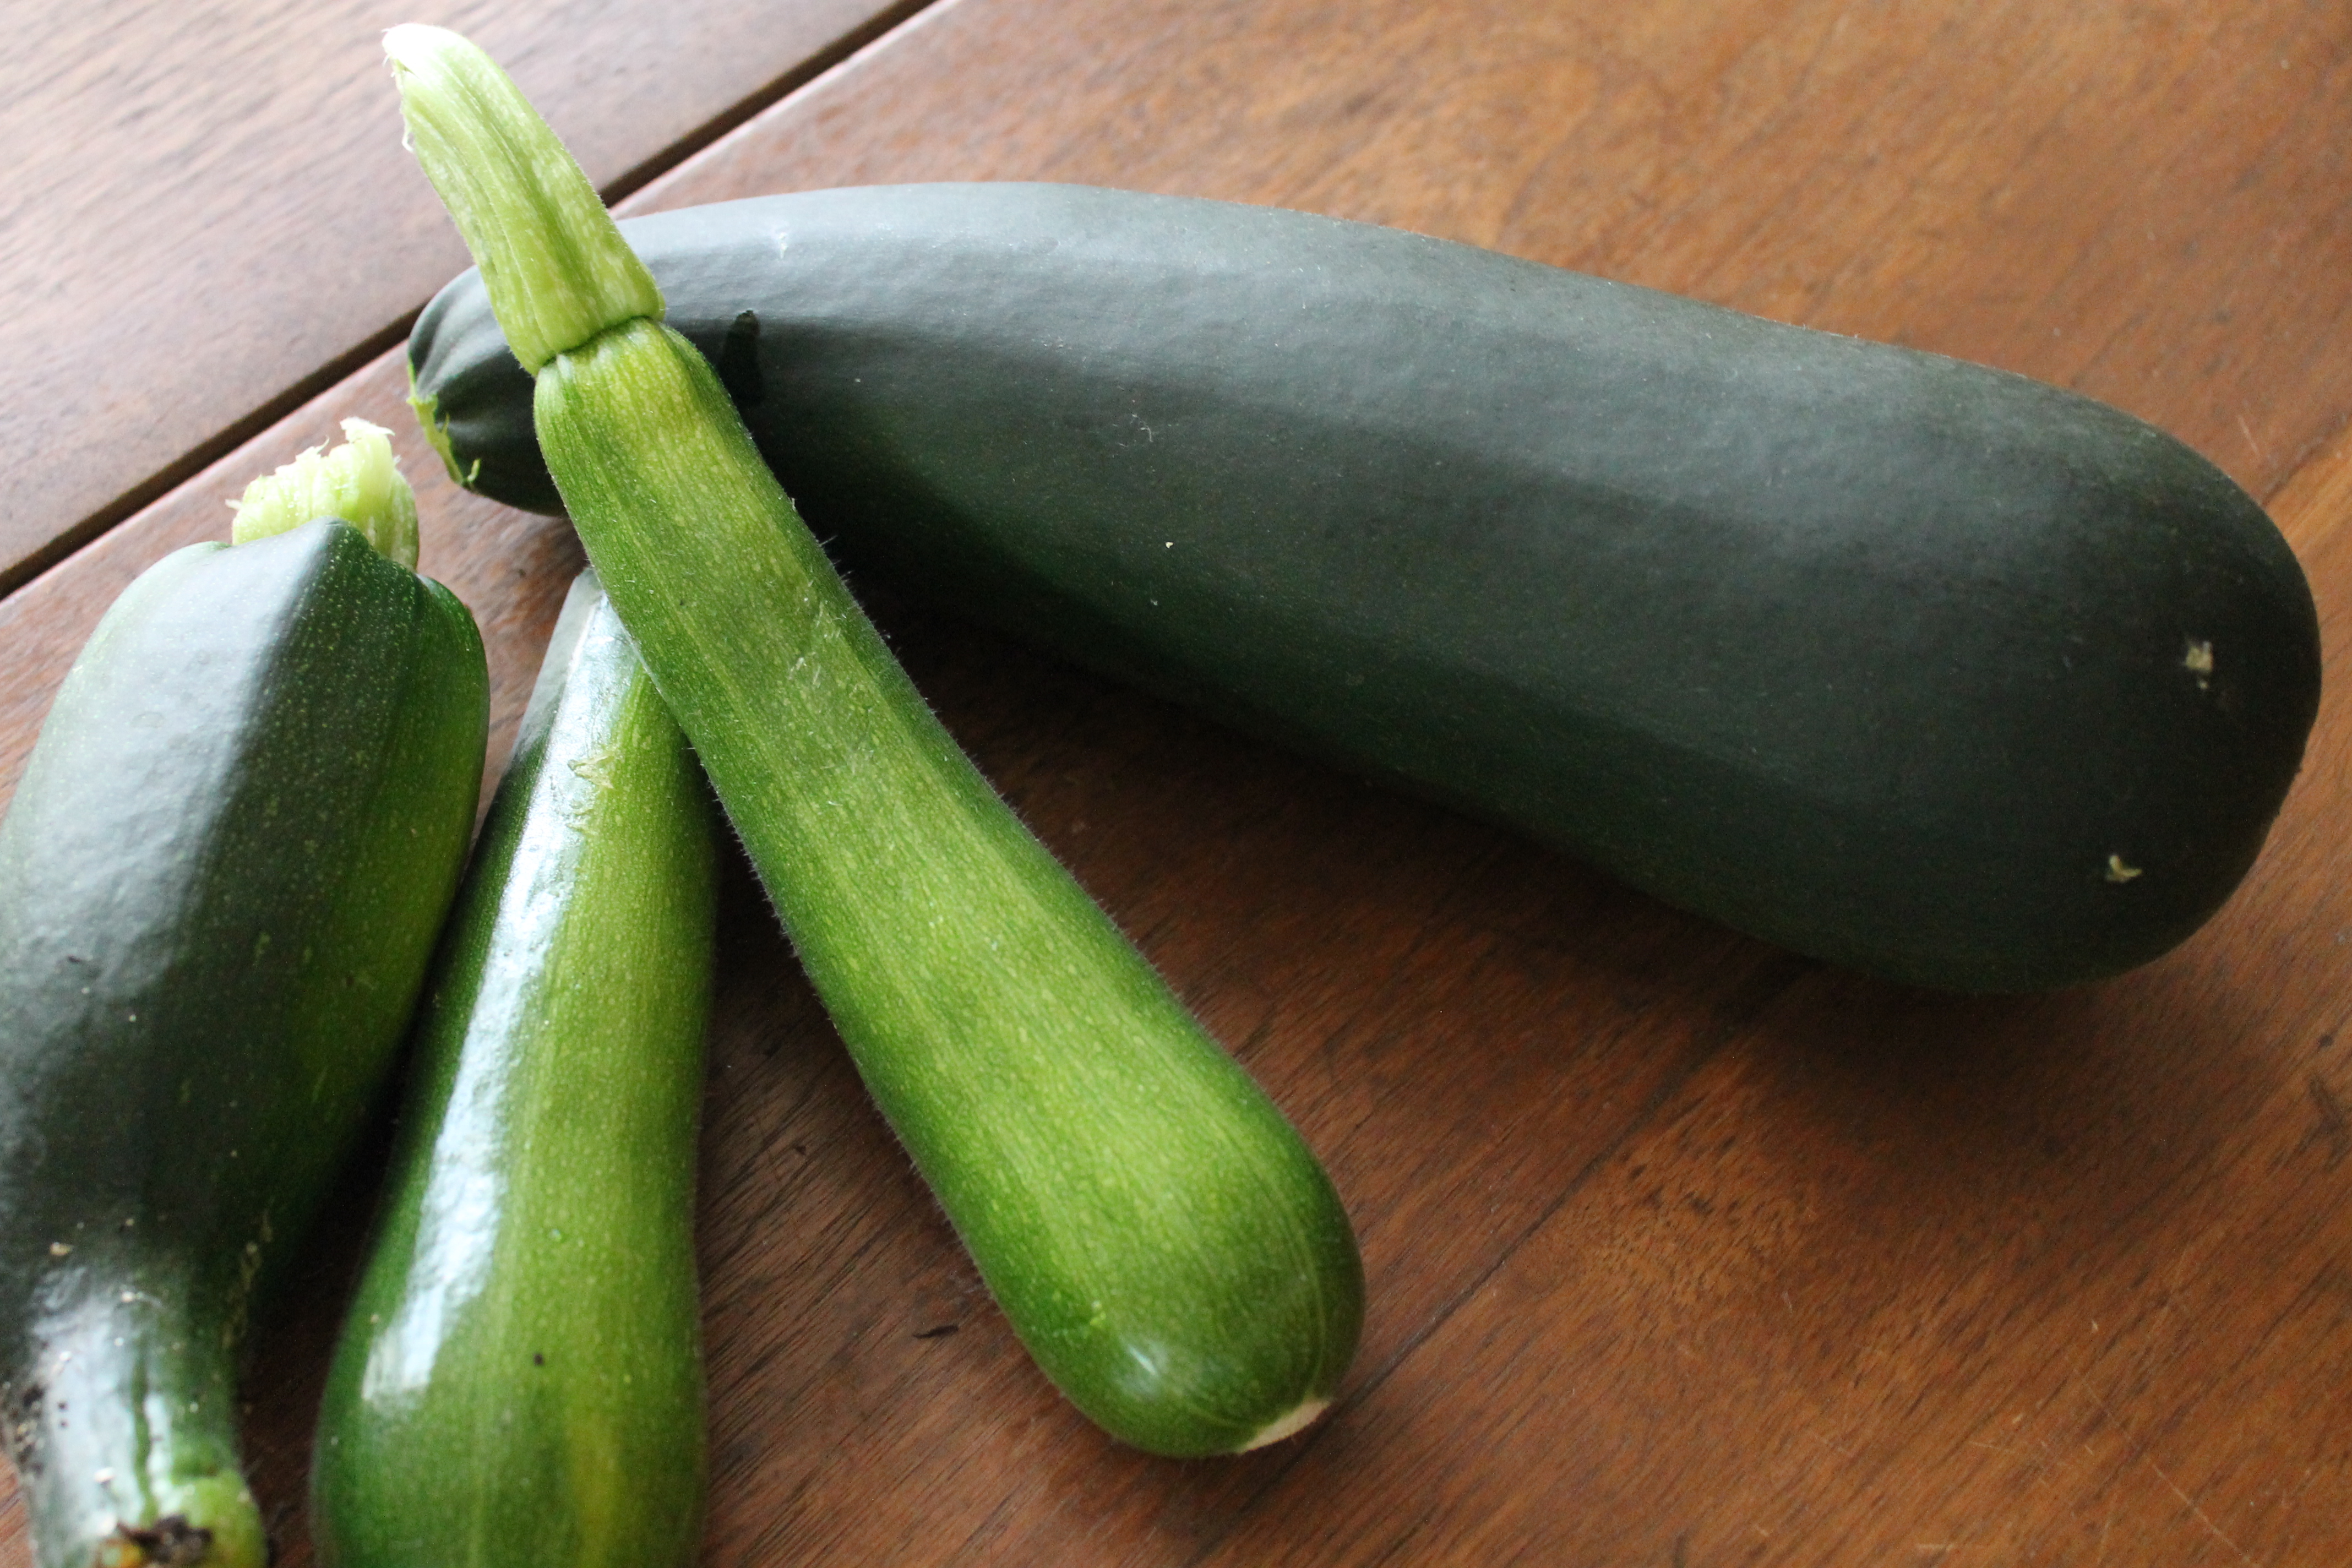 Four Zucchini harvested from the garden.